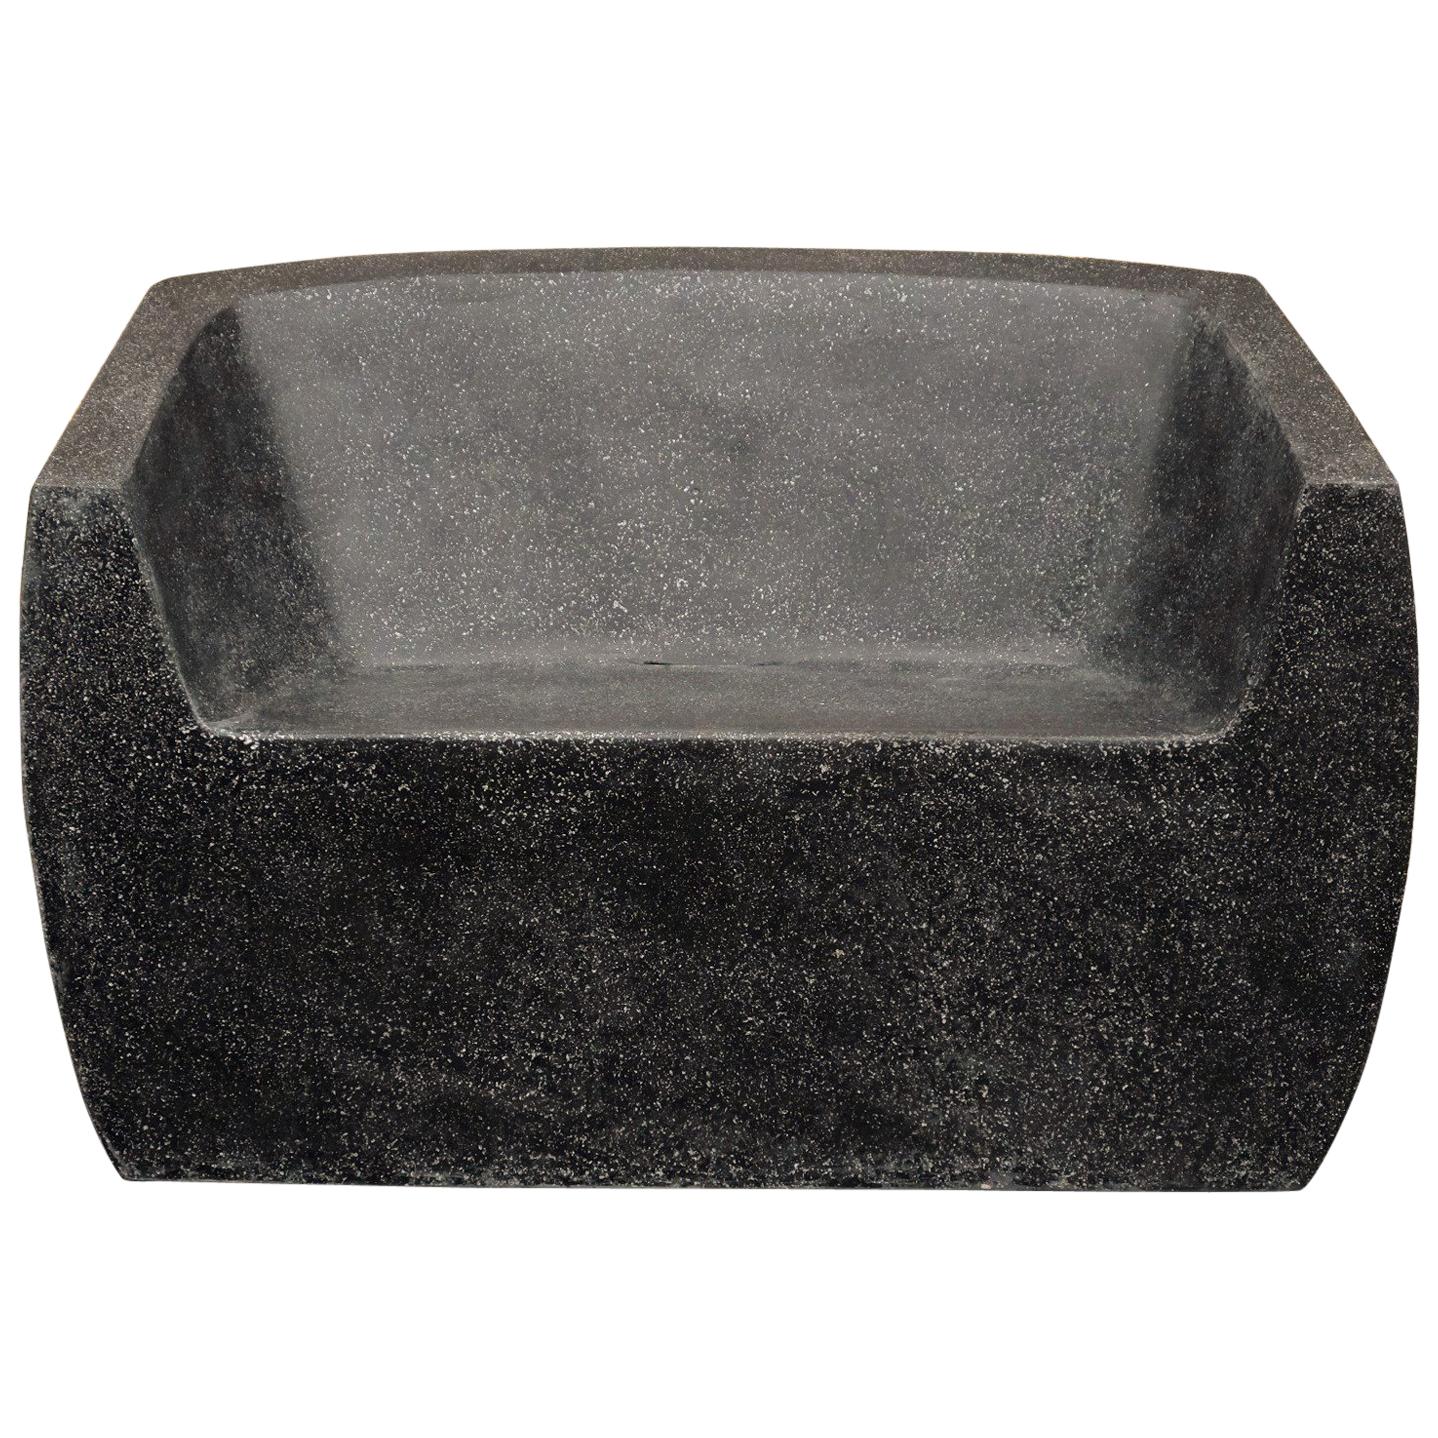 Cast Resin 'Van Dyke' Loveseat, Coal Stone Finish by Zachary A. Design For Sale